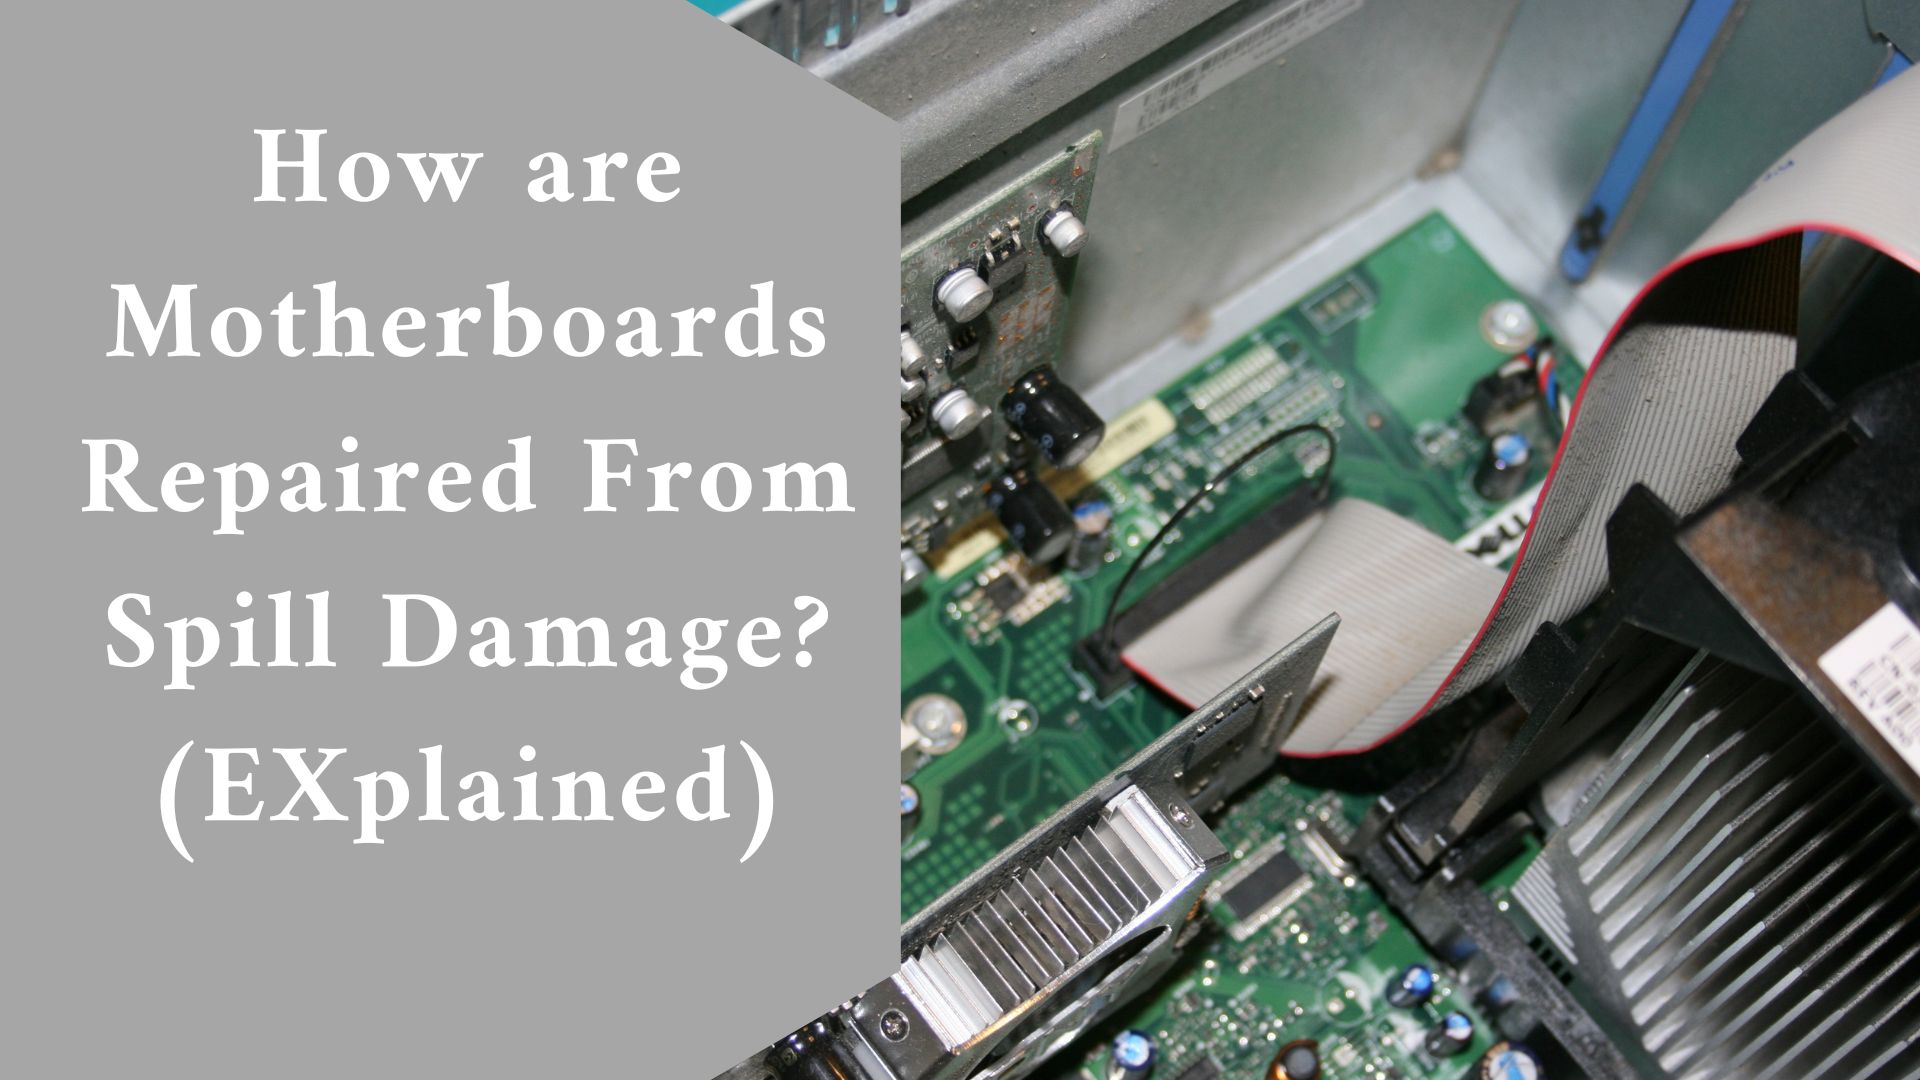 How are Motherboards Repaired From Spill Damage? (EXplained)